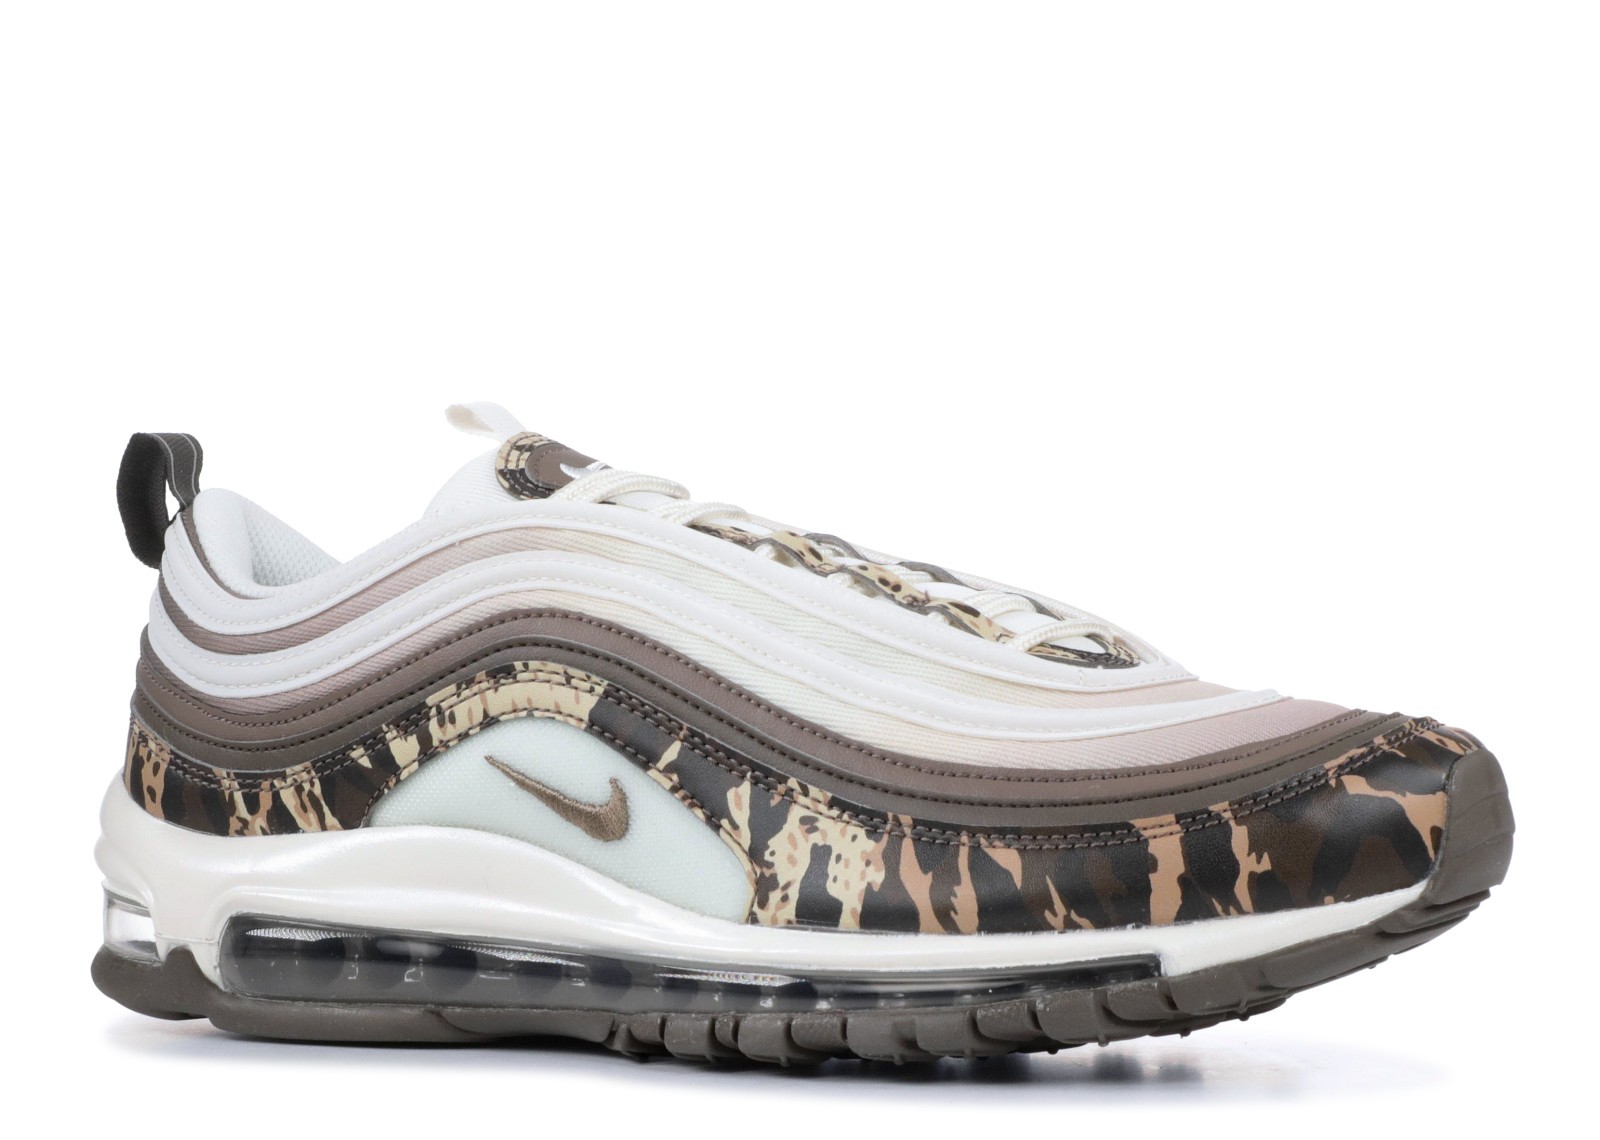 puede cáscara Característica MultiscaleconsultingShops - Nike one Air Max 97 Camo Ridgerock Mink Brown  917646 - 201 - We assume that the sneakers will only drop at Nike